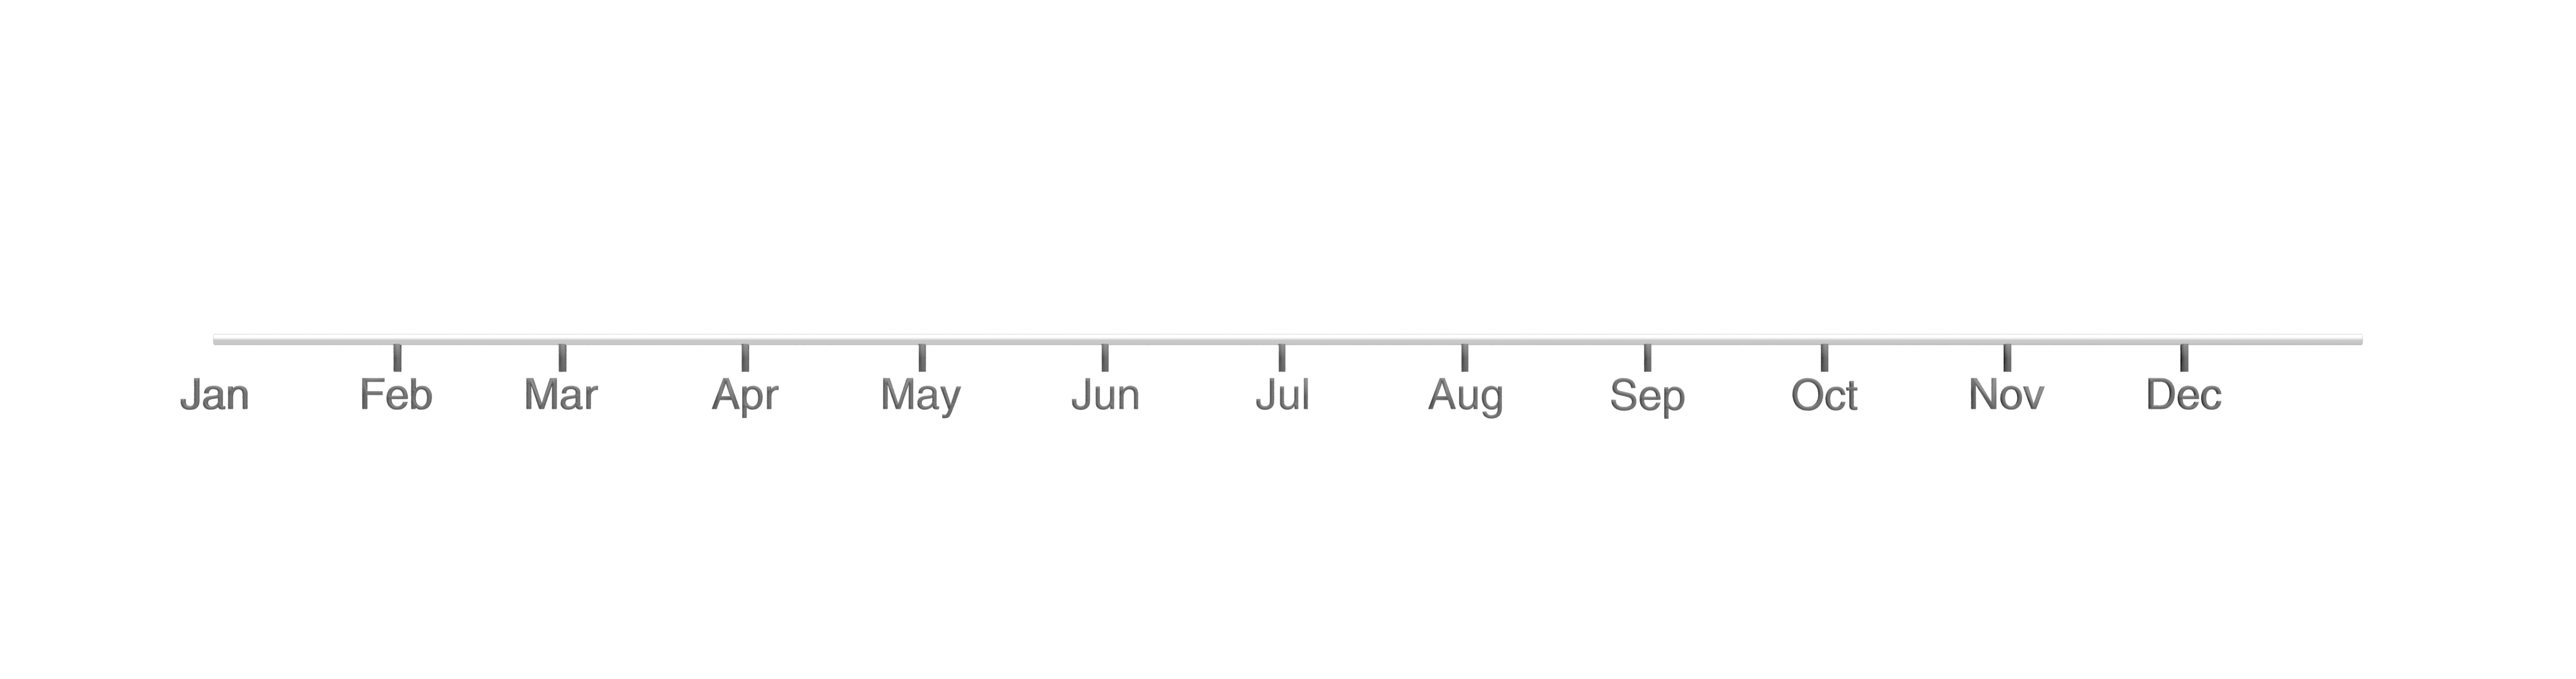 This timeline is synchronized with the atmospheric carbon dioxide visualization above to show temporal progress across the year.